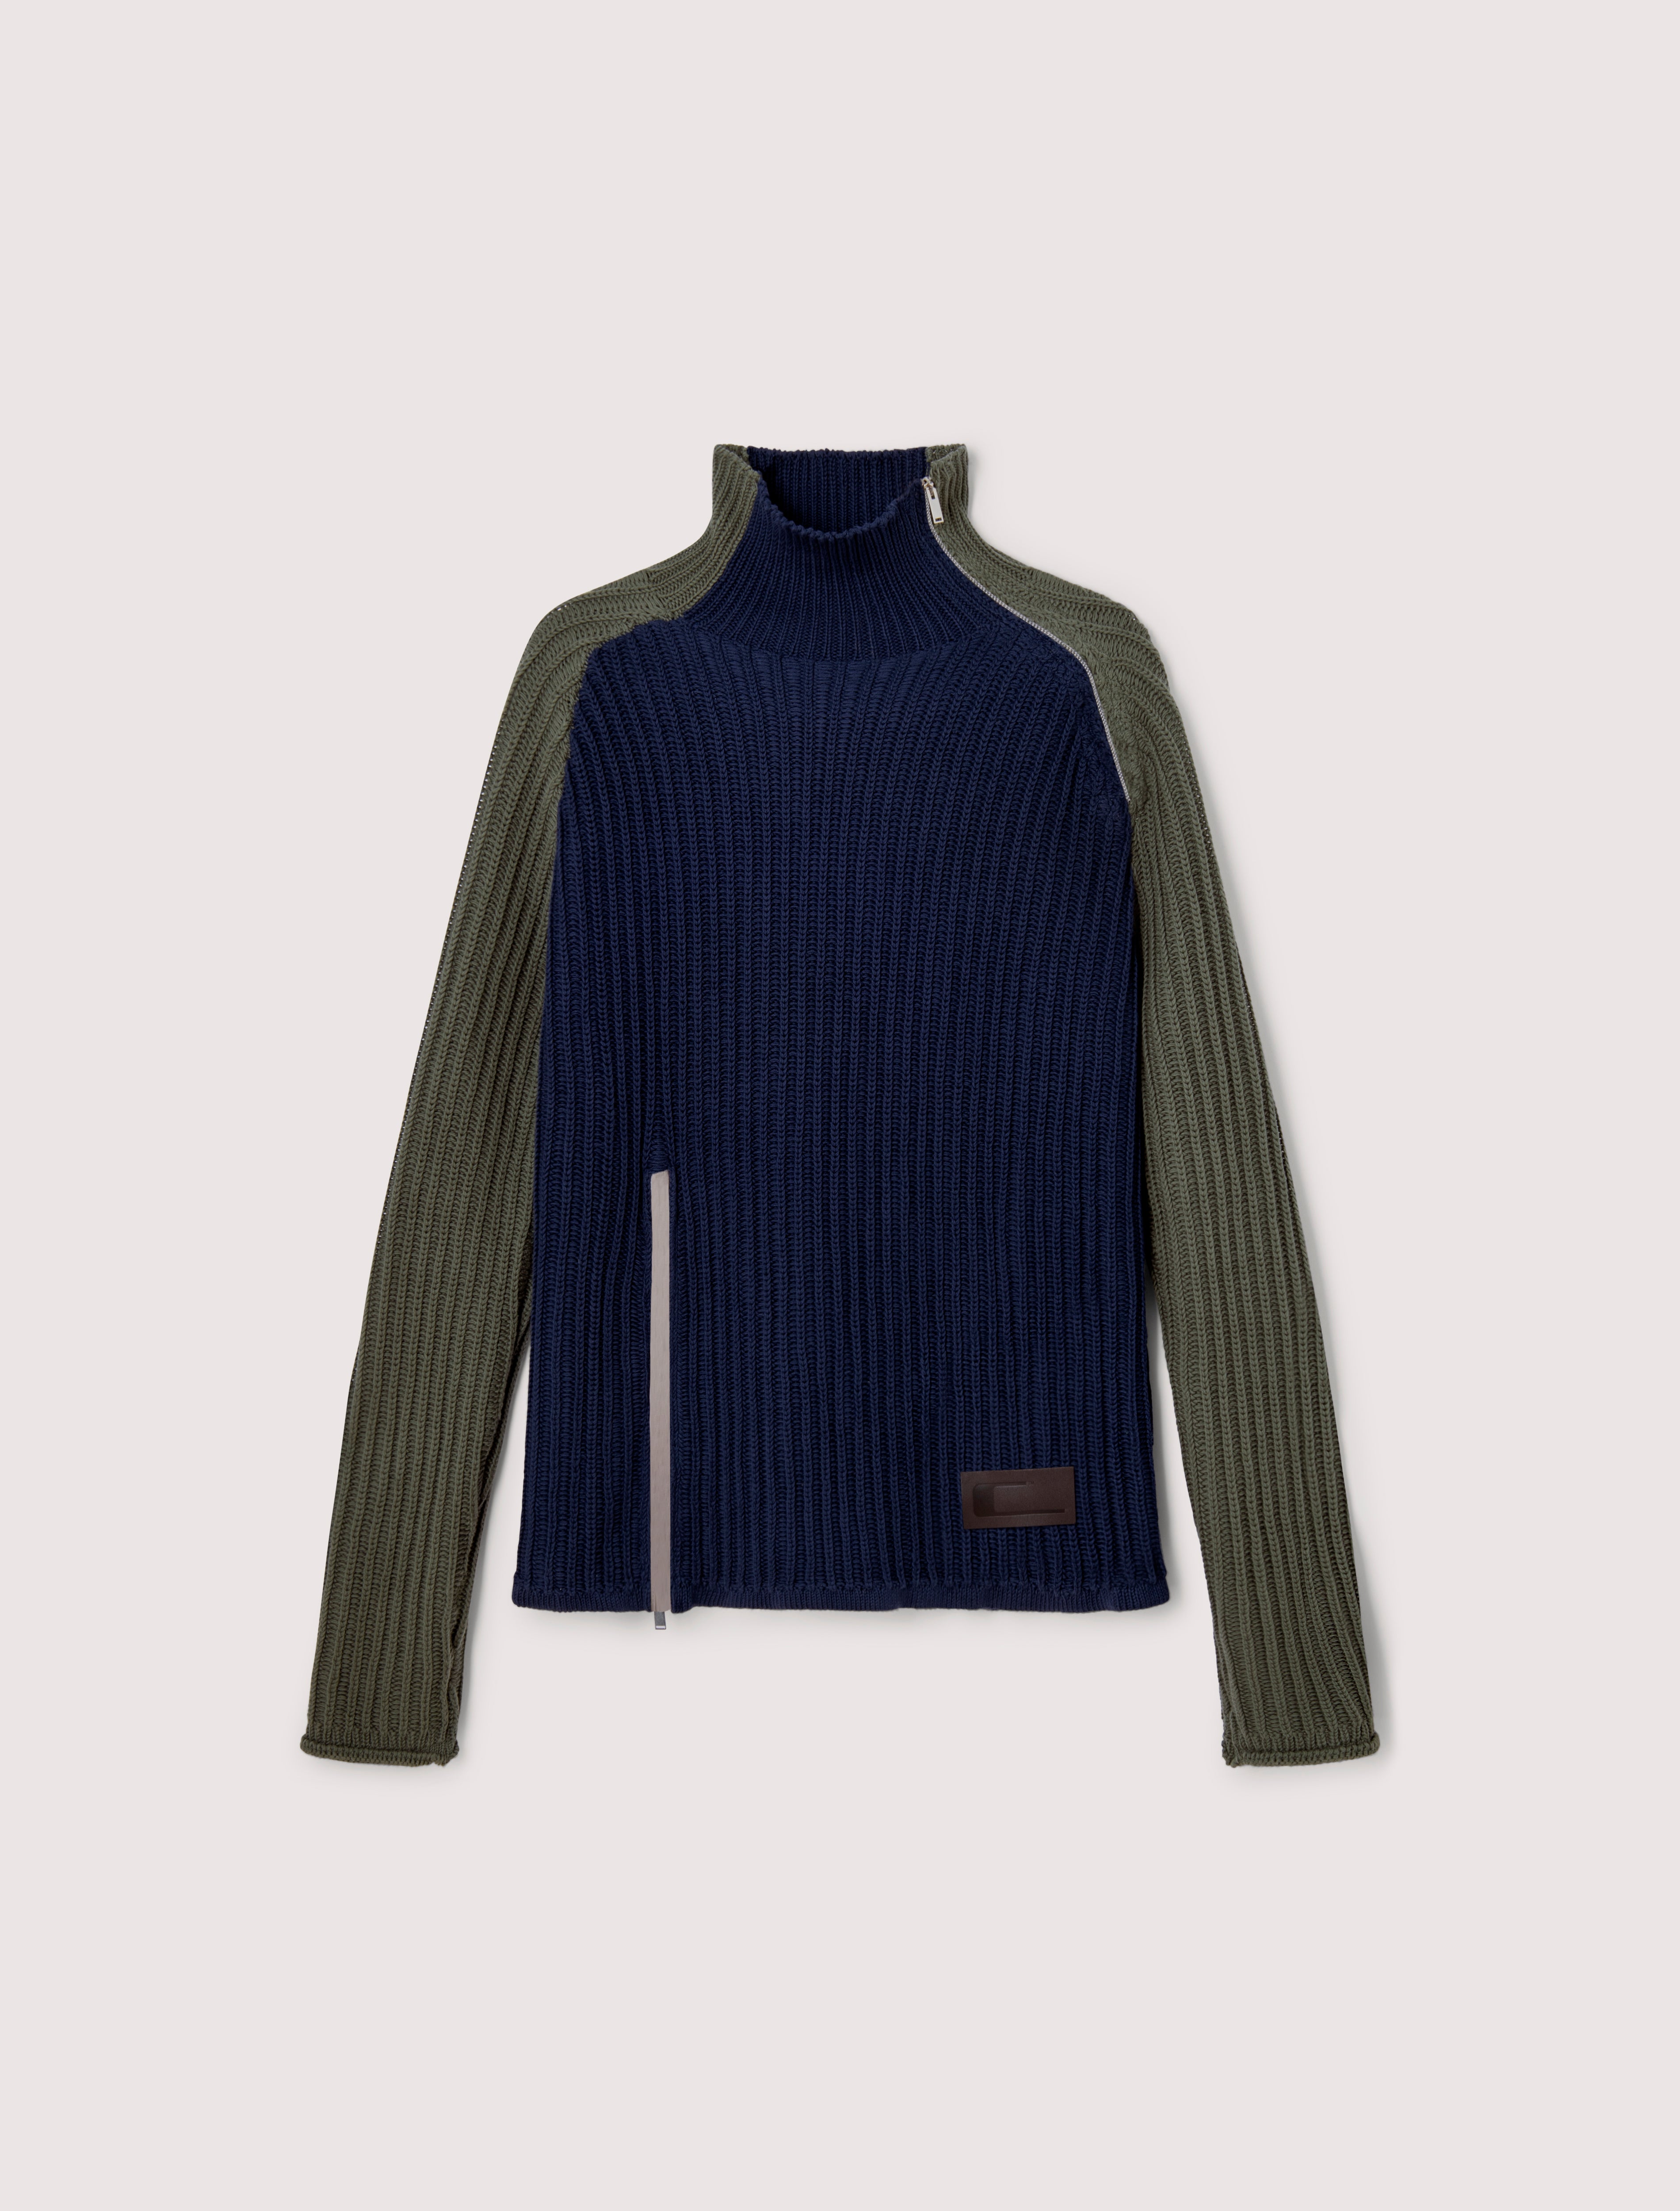 CARRER_REC KNITTED ZIP UP IN BLUE AND GREEN